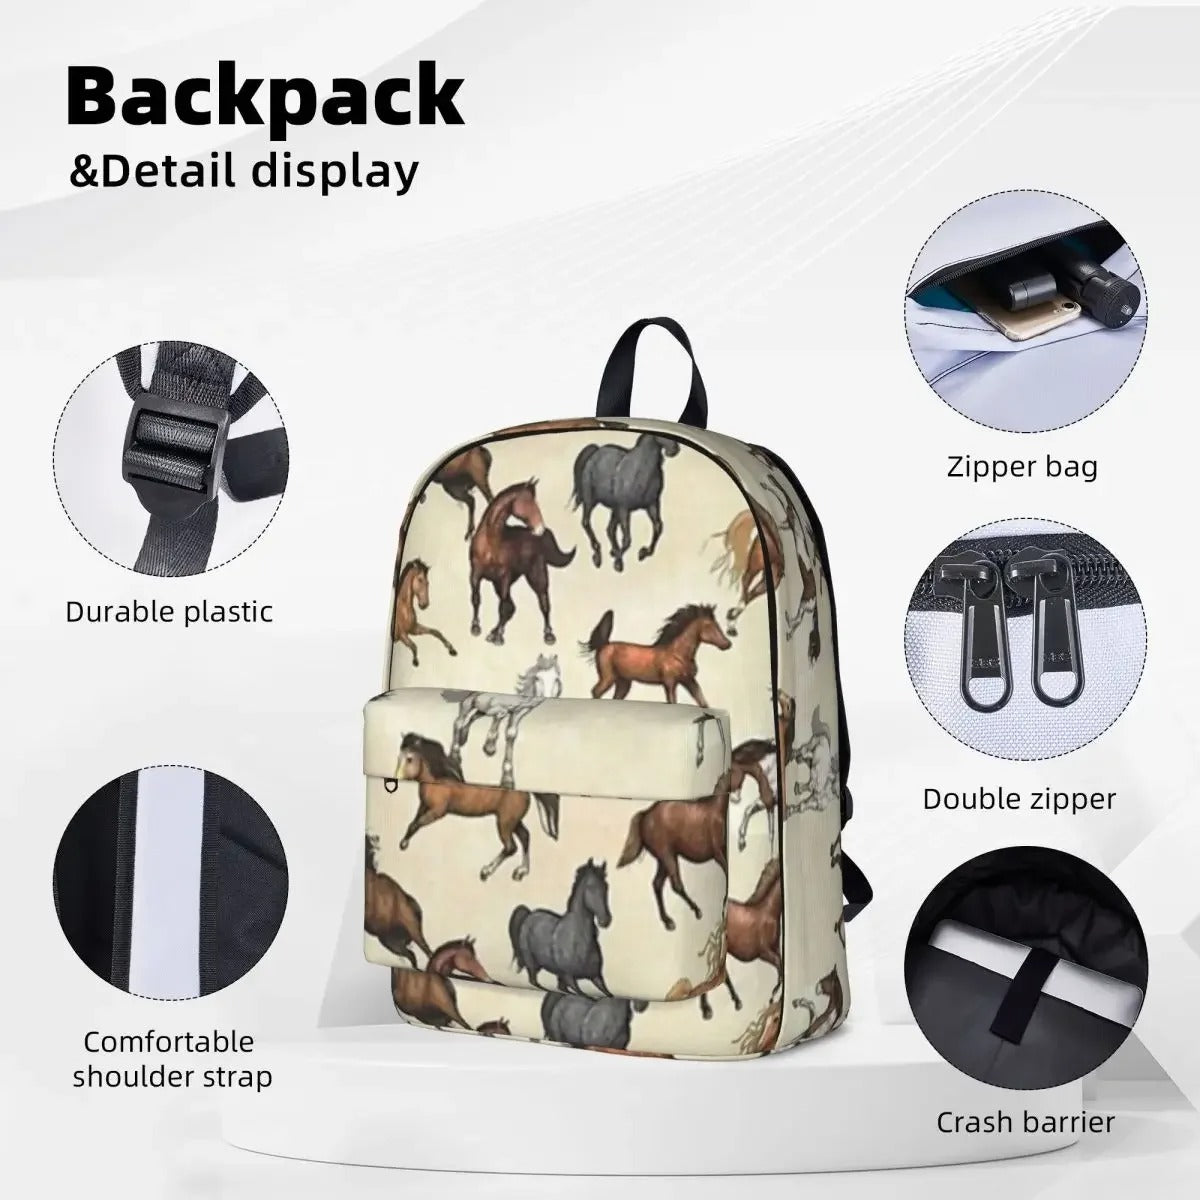 Backpack with Horse Design